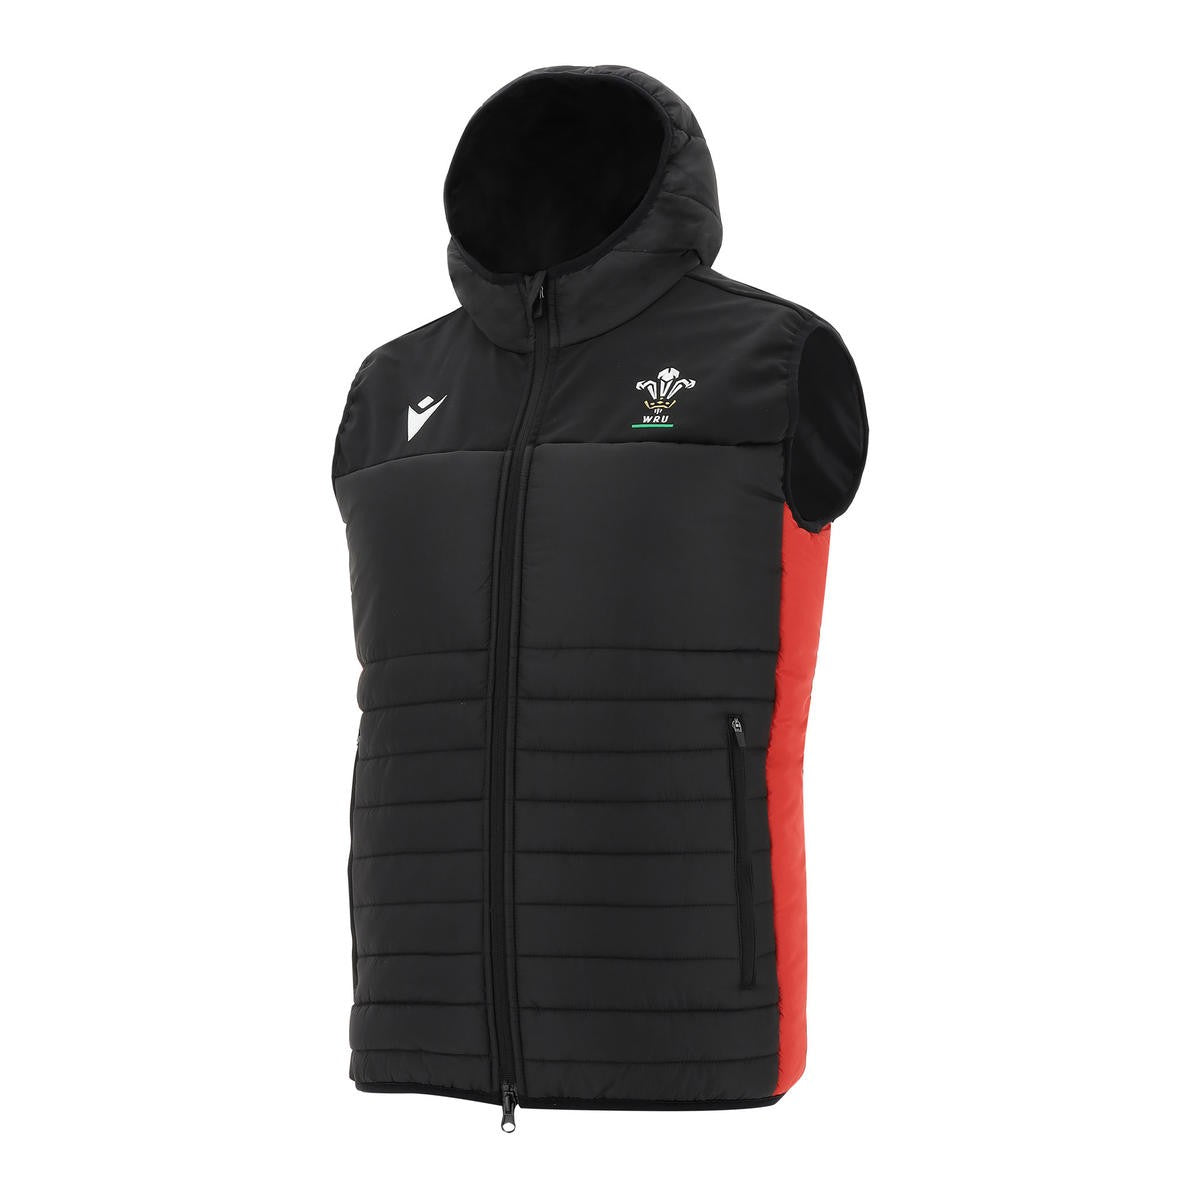 Gilet Smanicato Rugby Galles Macron